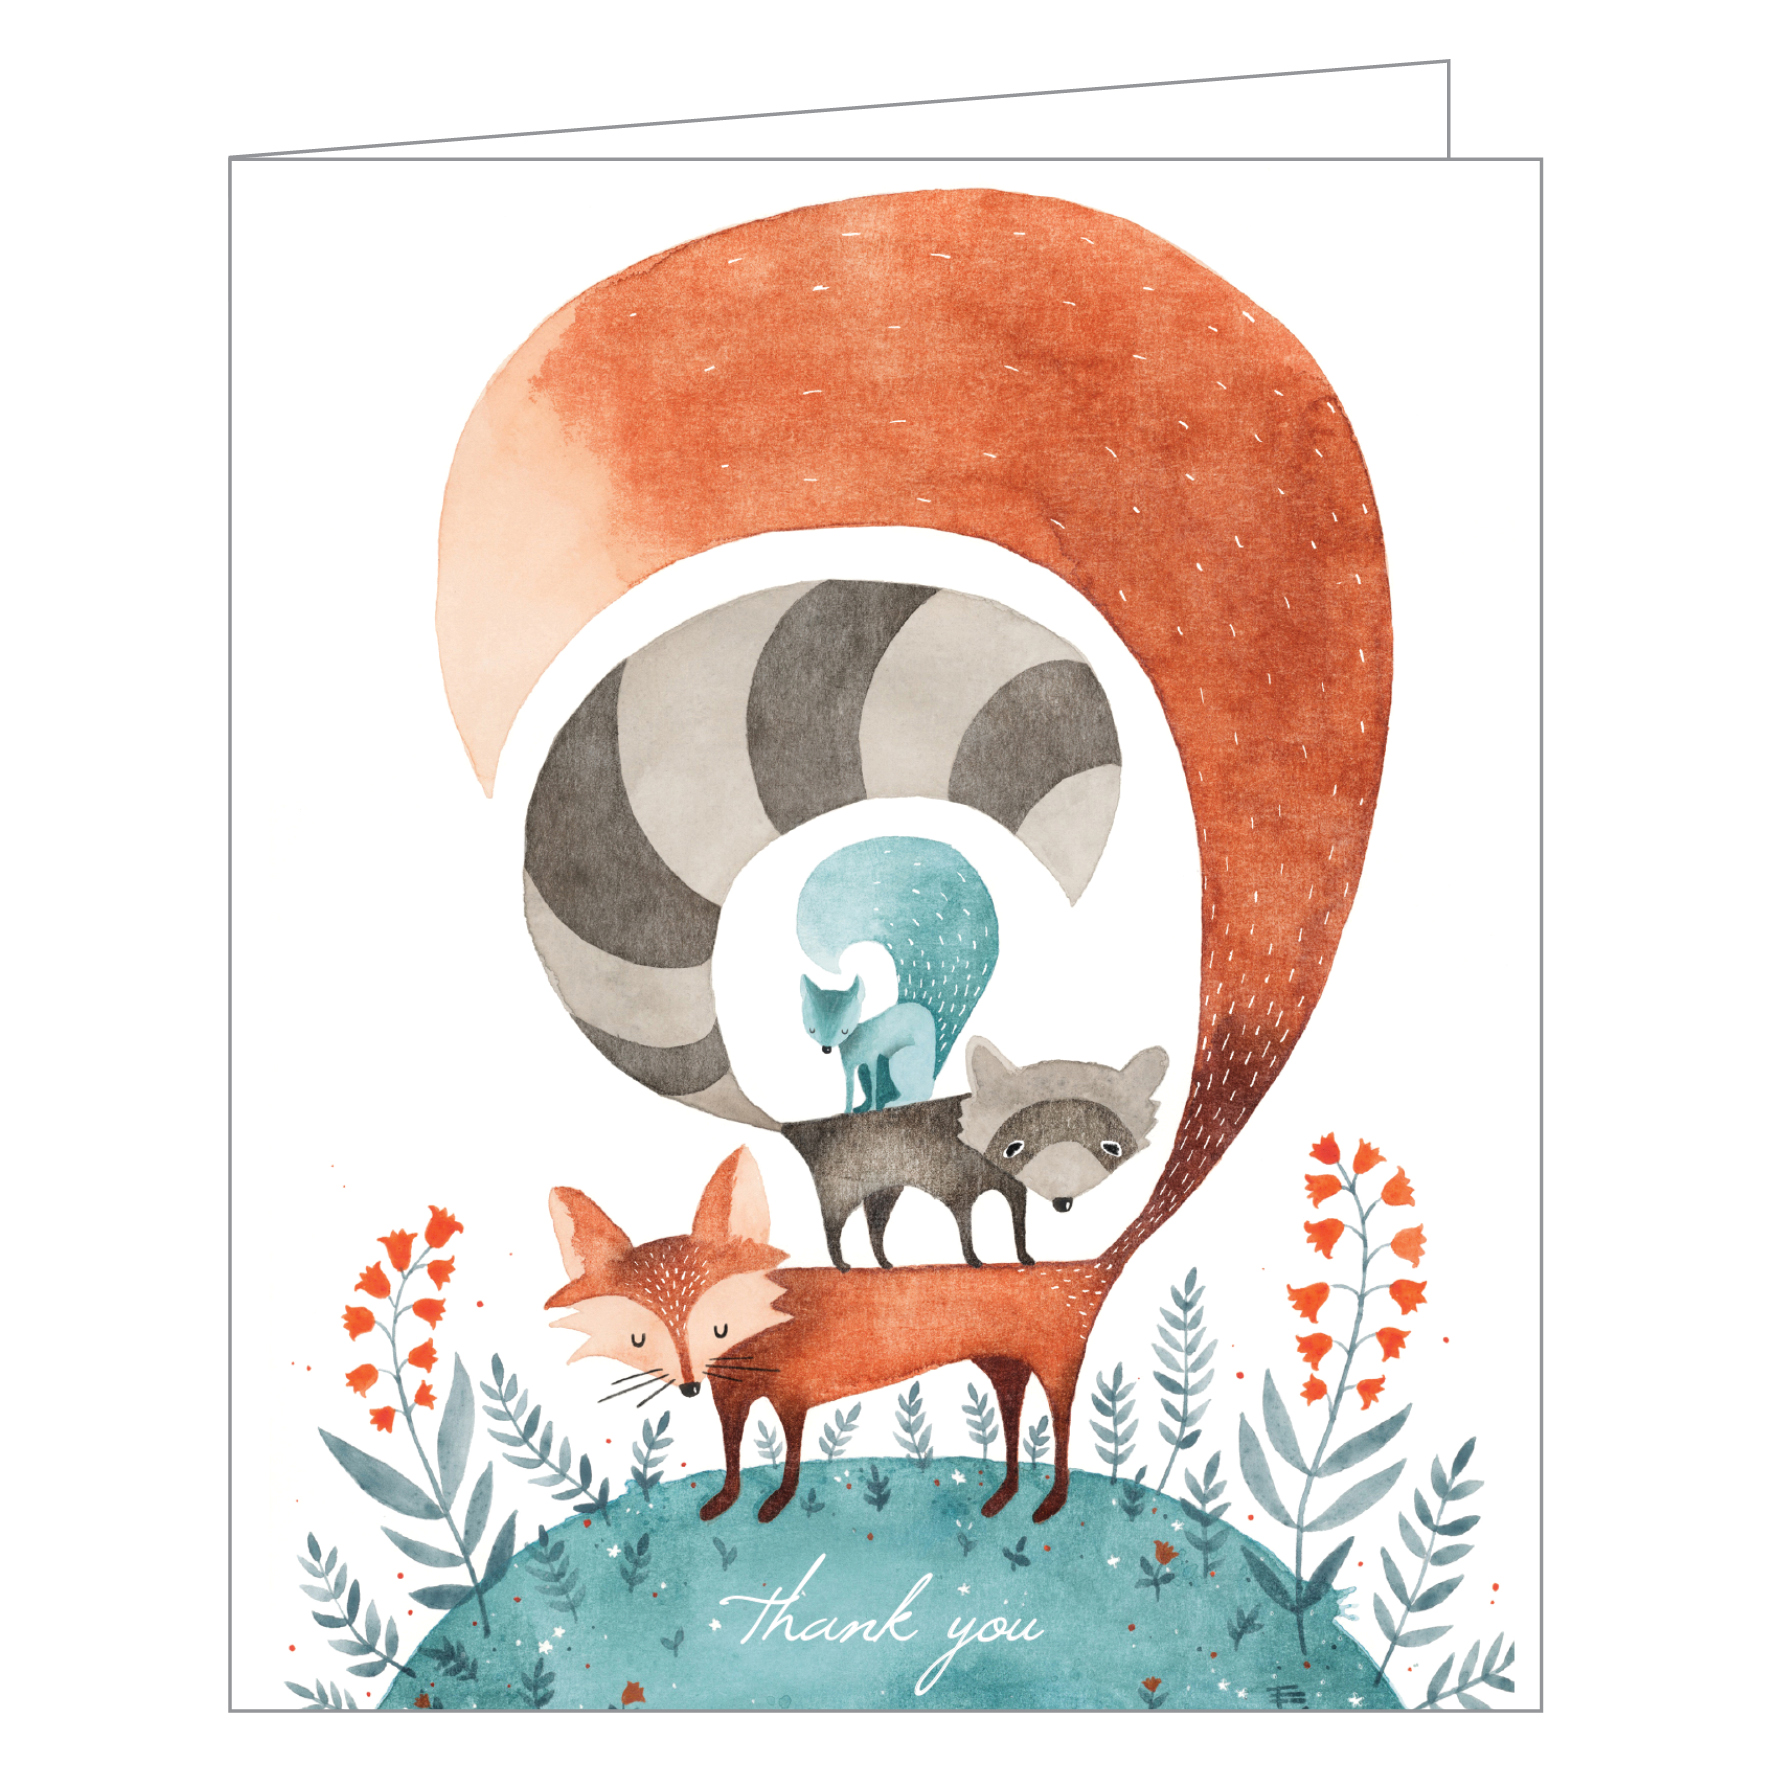 Eva Juliet's cute forest animal design with fox, badger and squirrel, to notecard box, by teNeues stationery.